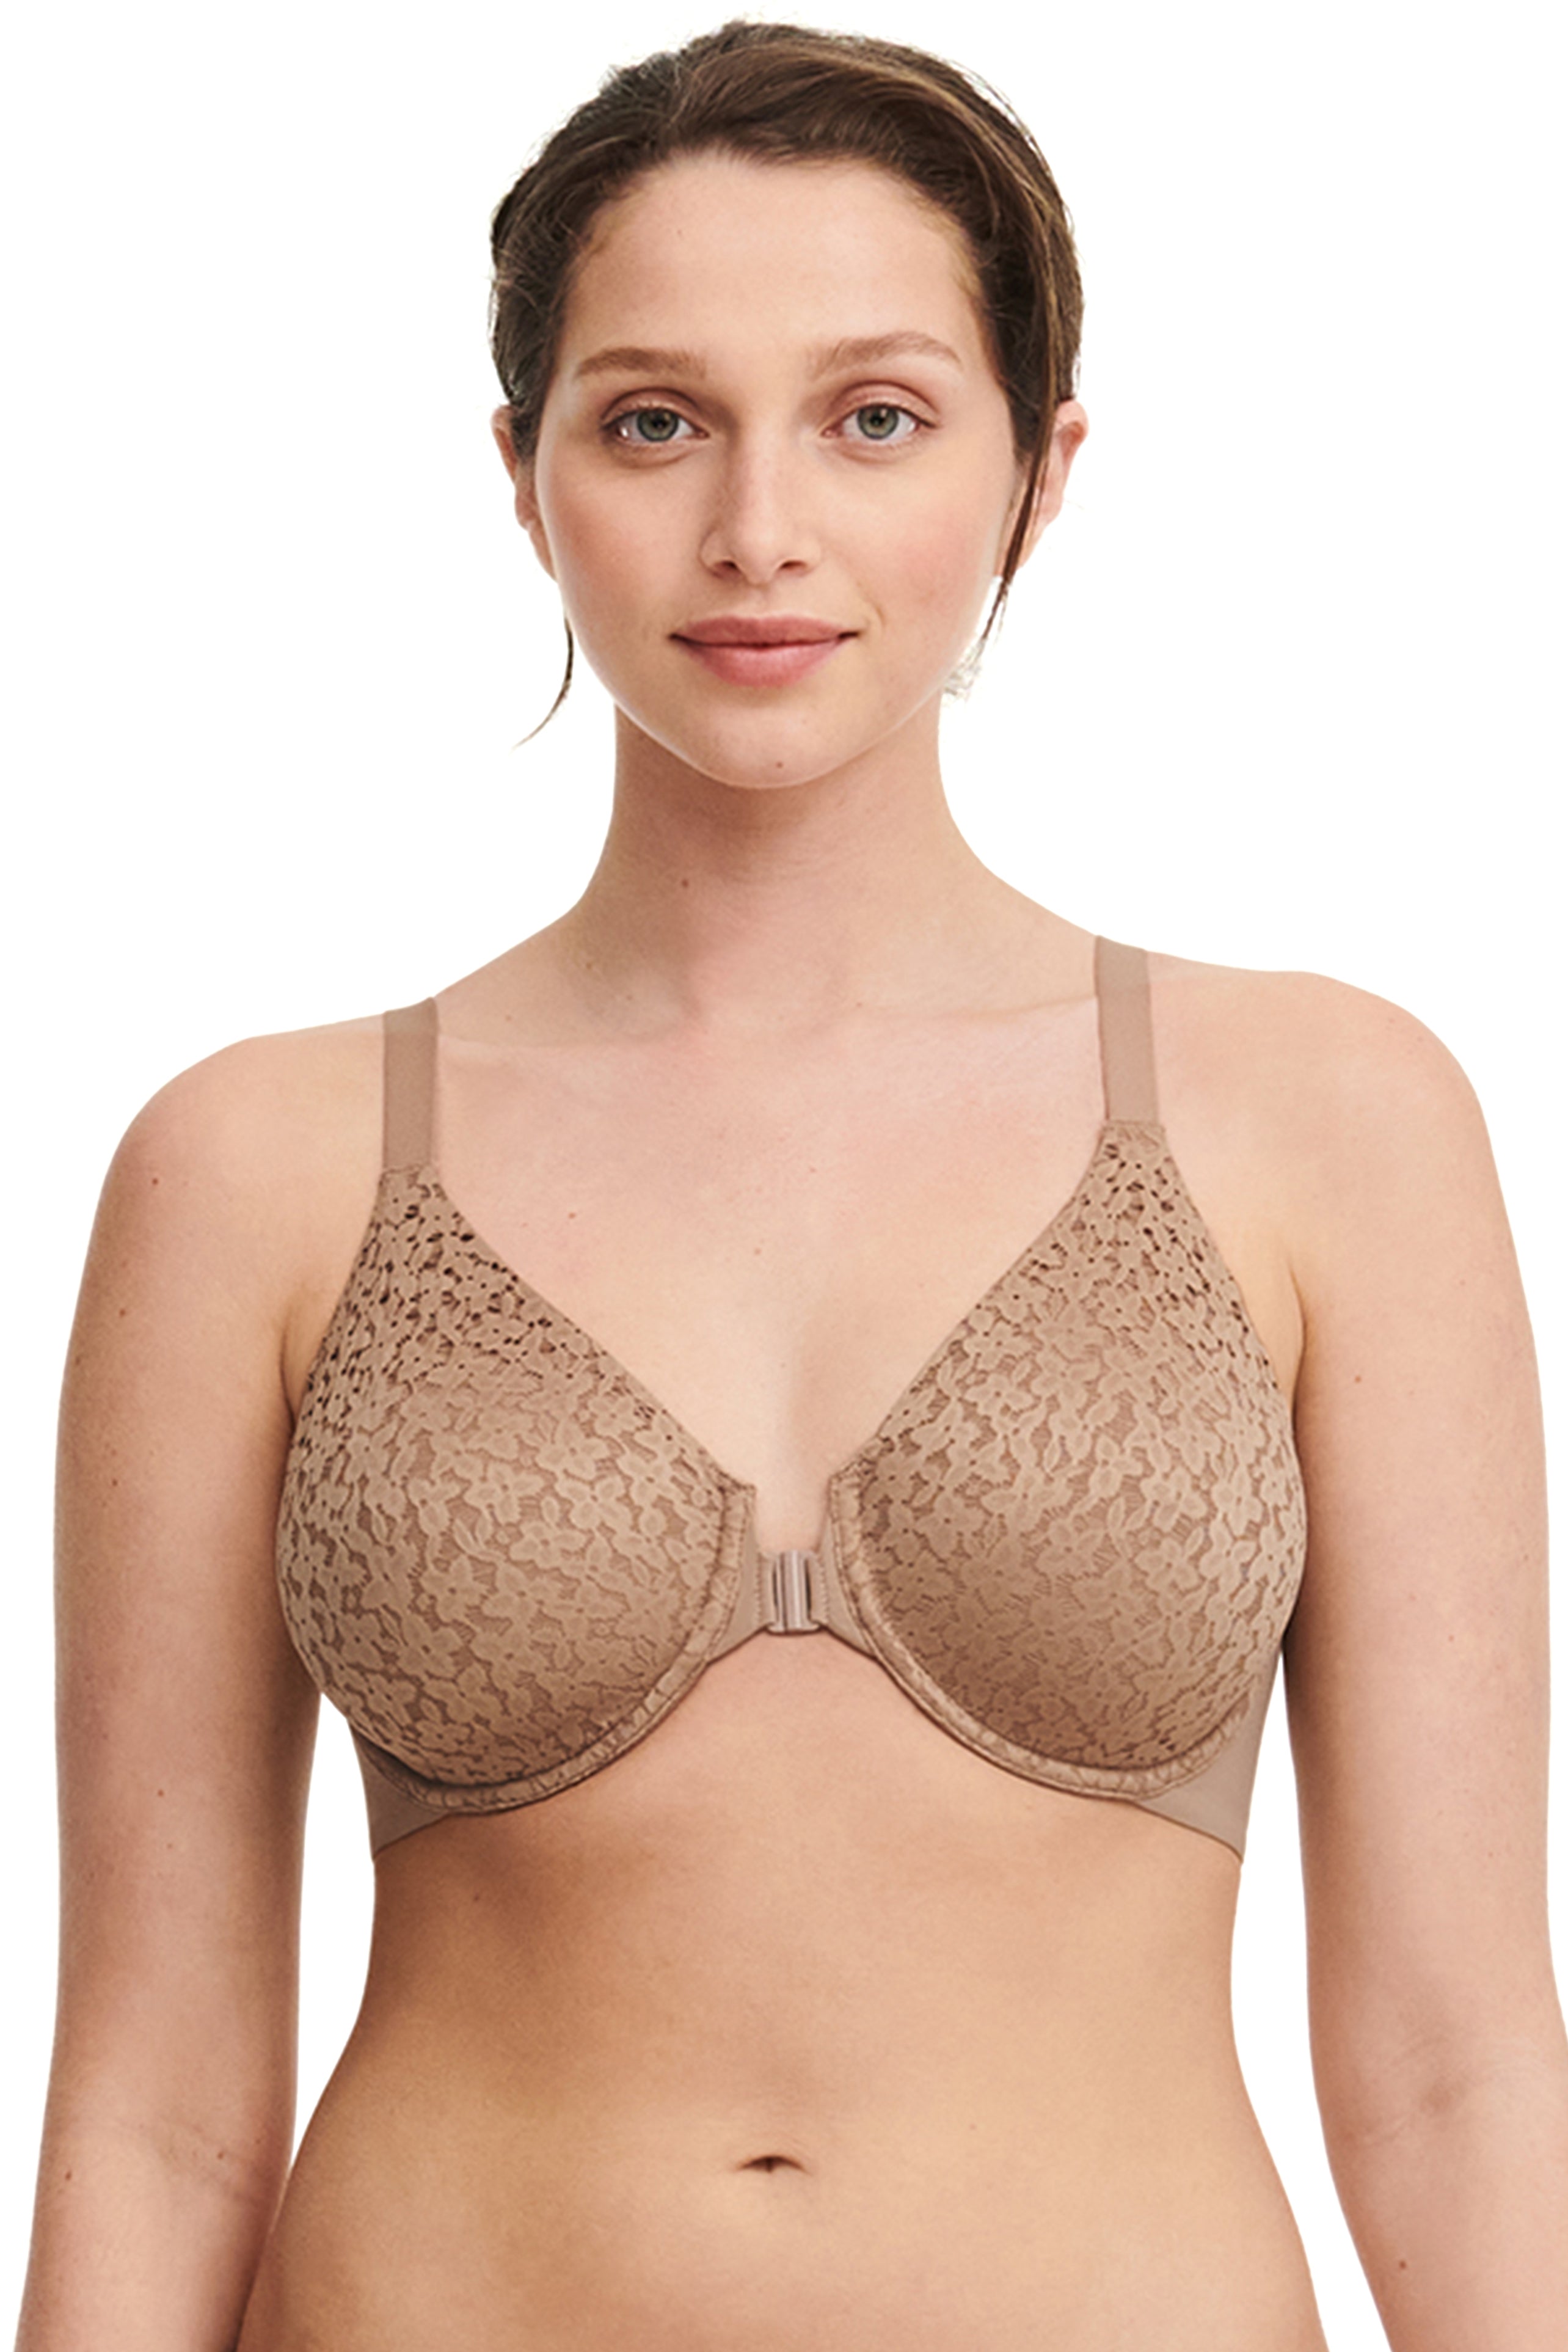 840b4 Just My Size 1107 Front Close Wirefree Bra 40d Beige for